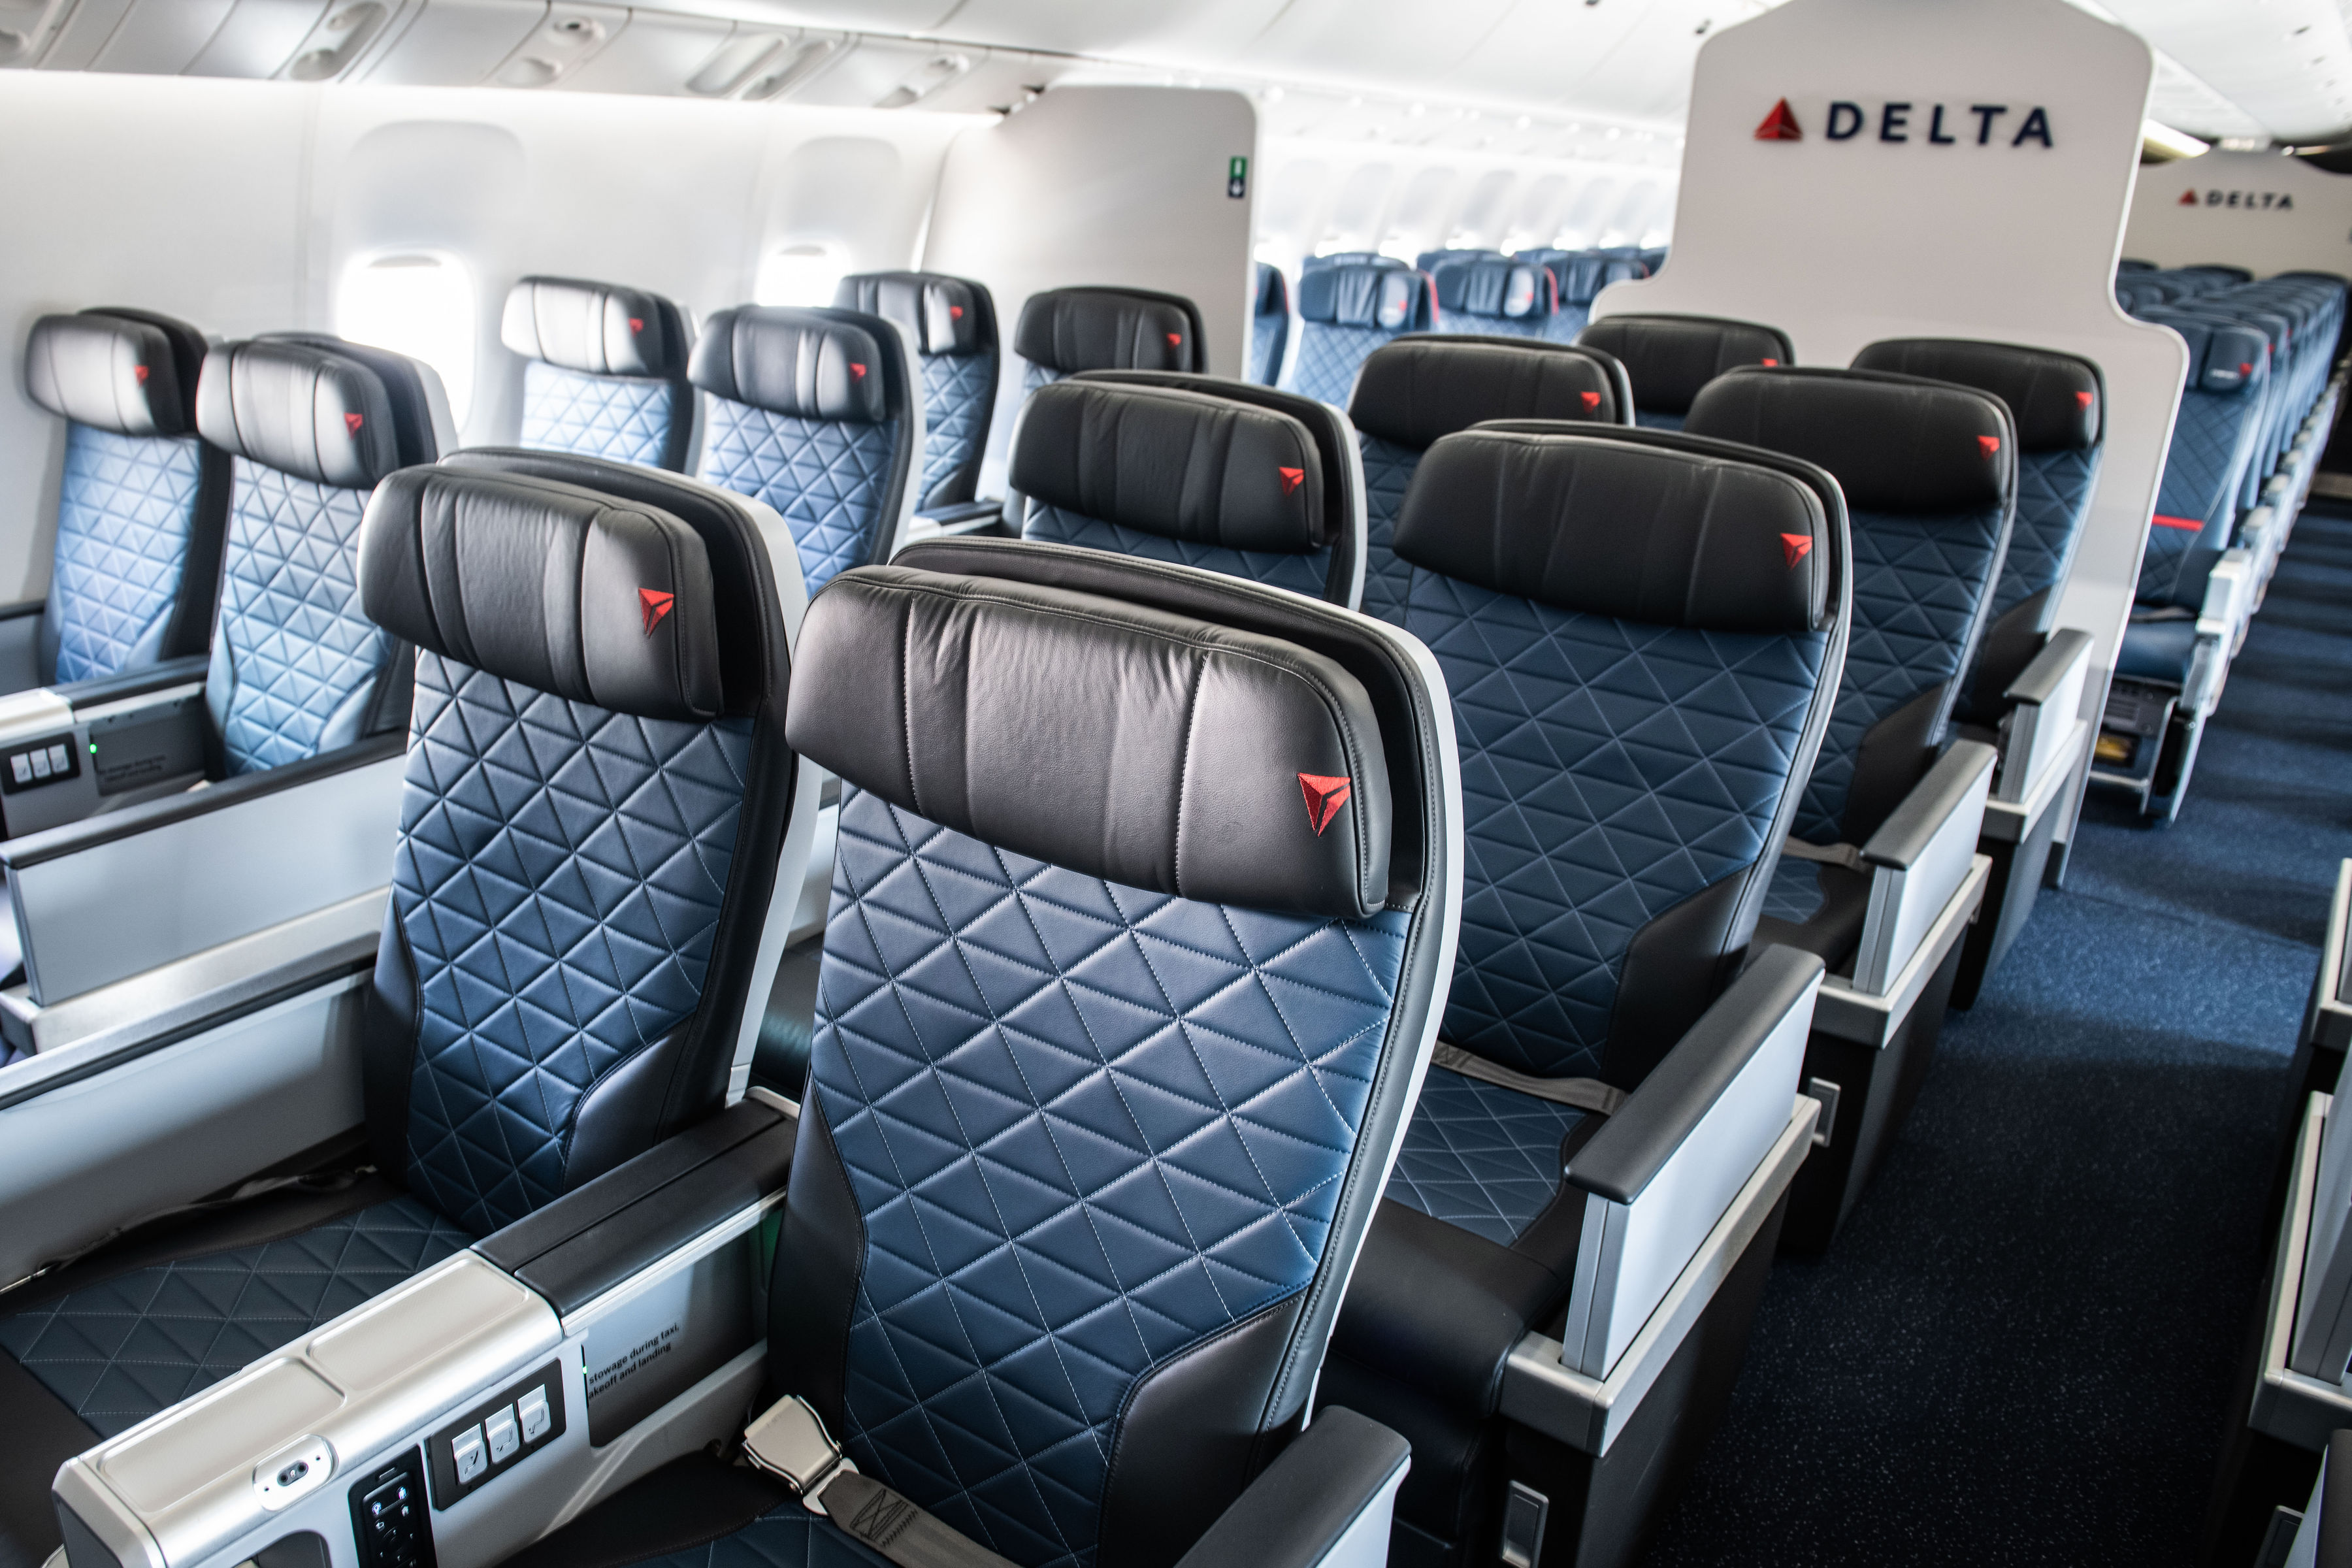 delta seat assignment policy